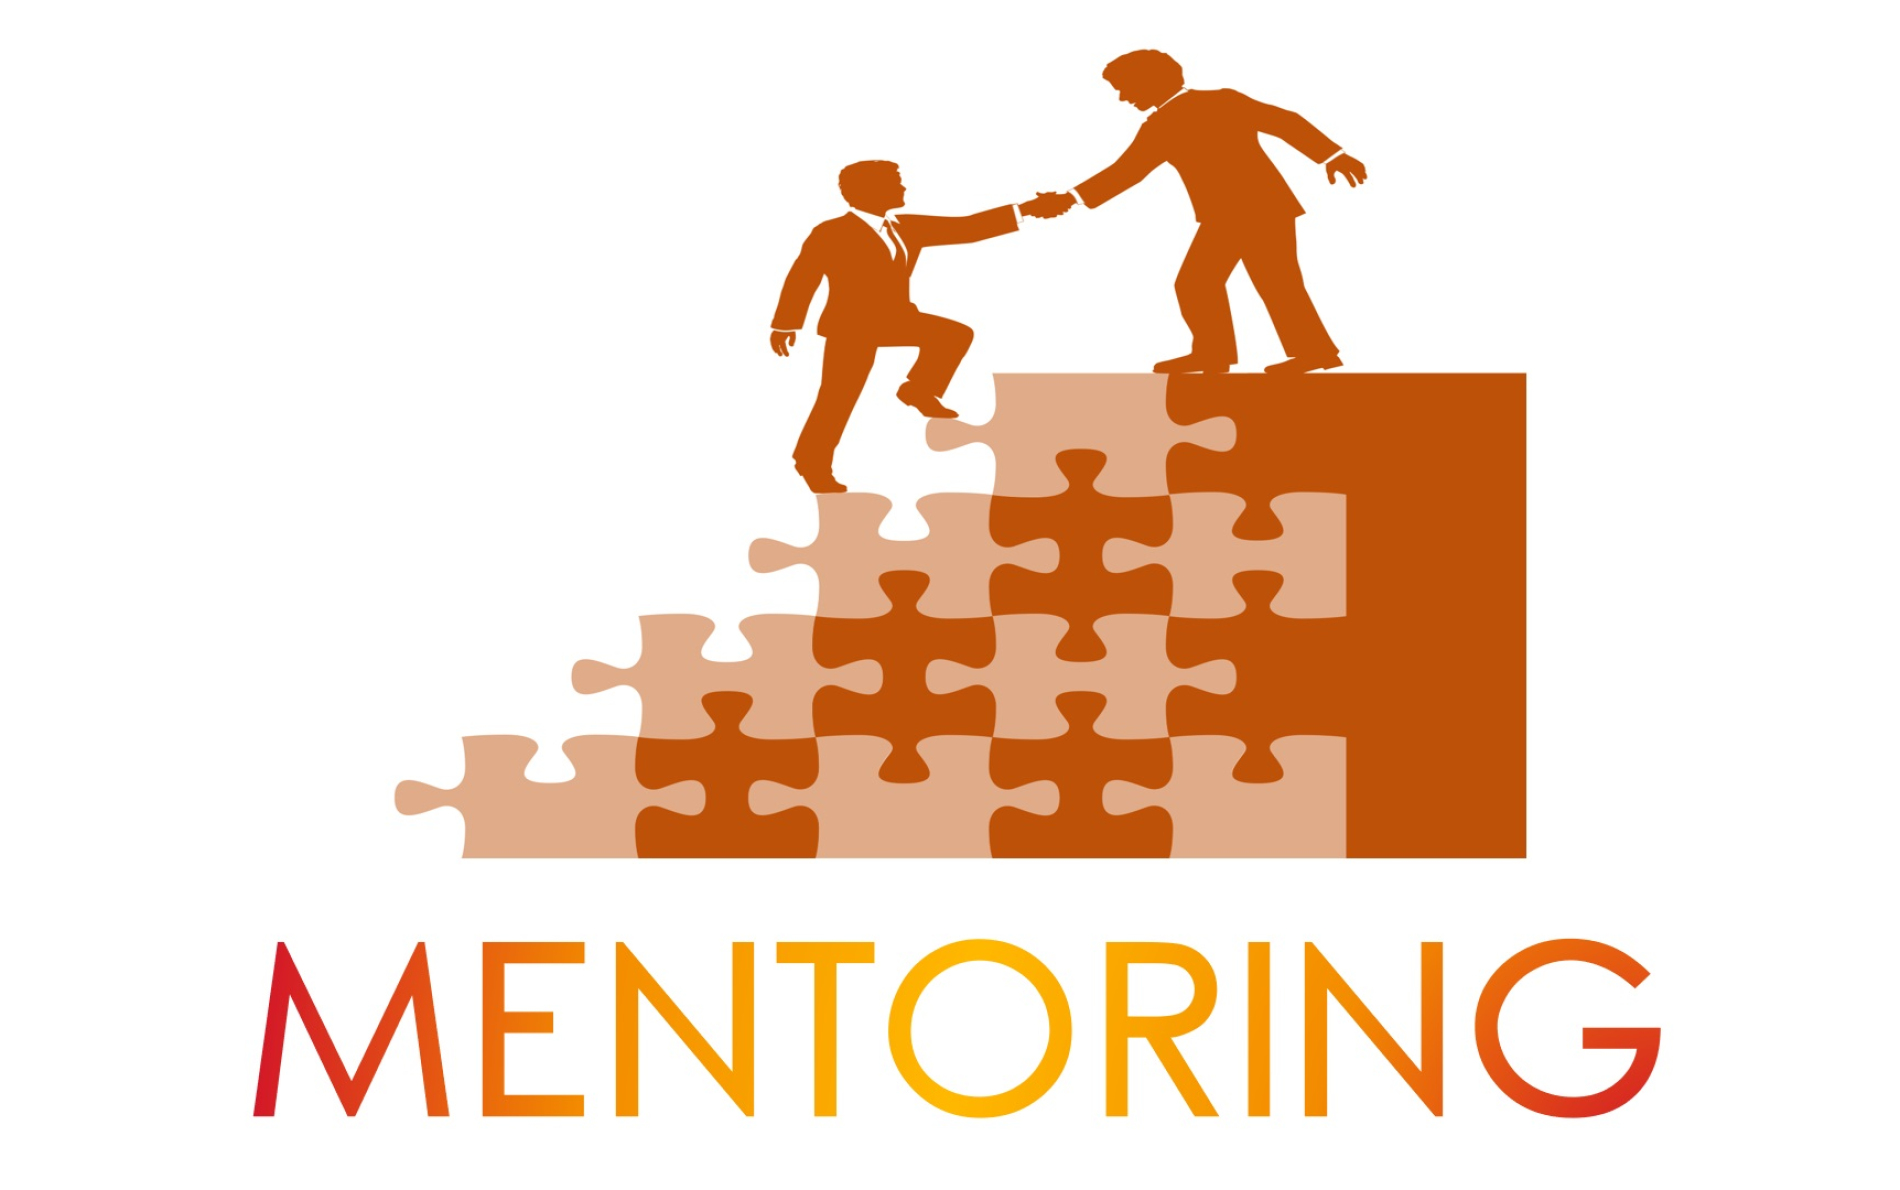 Guiding Growth: The Inclusive Power of Mentorship for Everyone